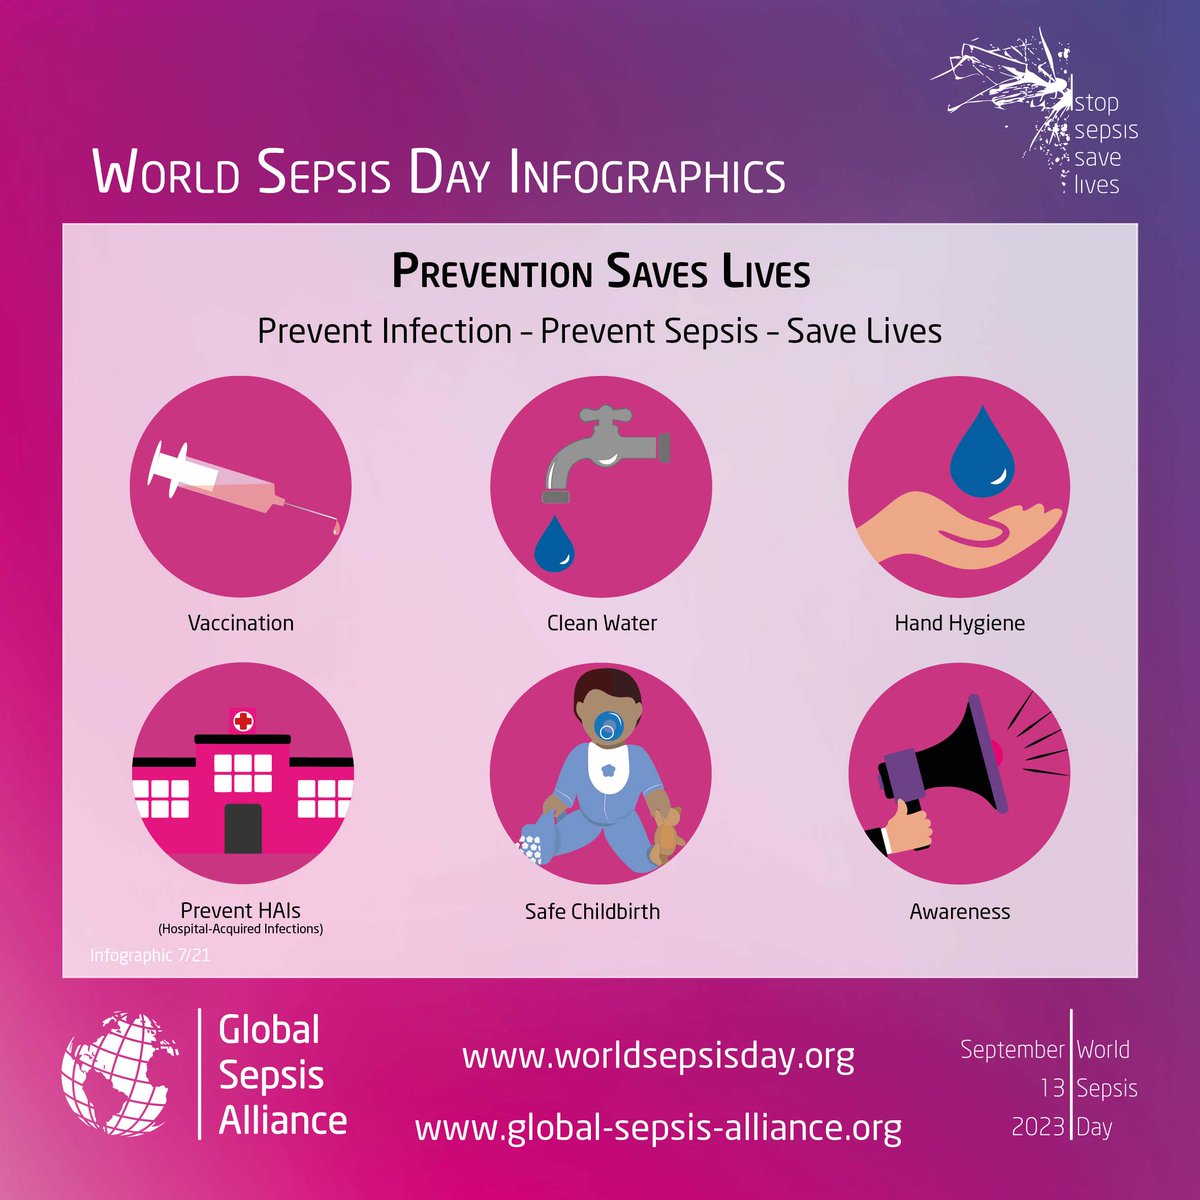 #Sepsis is a global health crisis. But how can #sepsis be prevented in areas where it impacts populations the most? 👇Learn more from this @GlobalSepsis infographic & follow Action on Sepsis as we approach @WorldSepsisDay 2023! #SepsisAwarenessMonth #StopSepsis